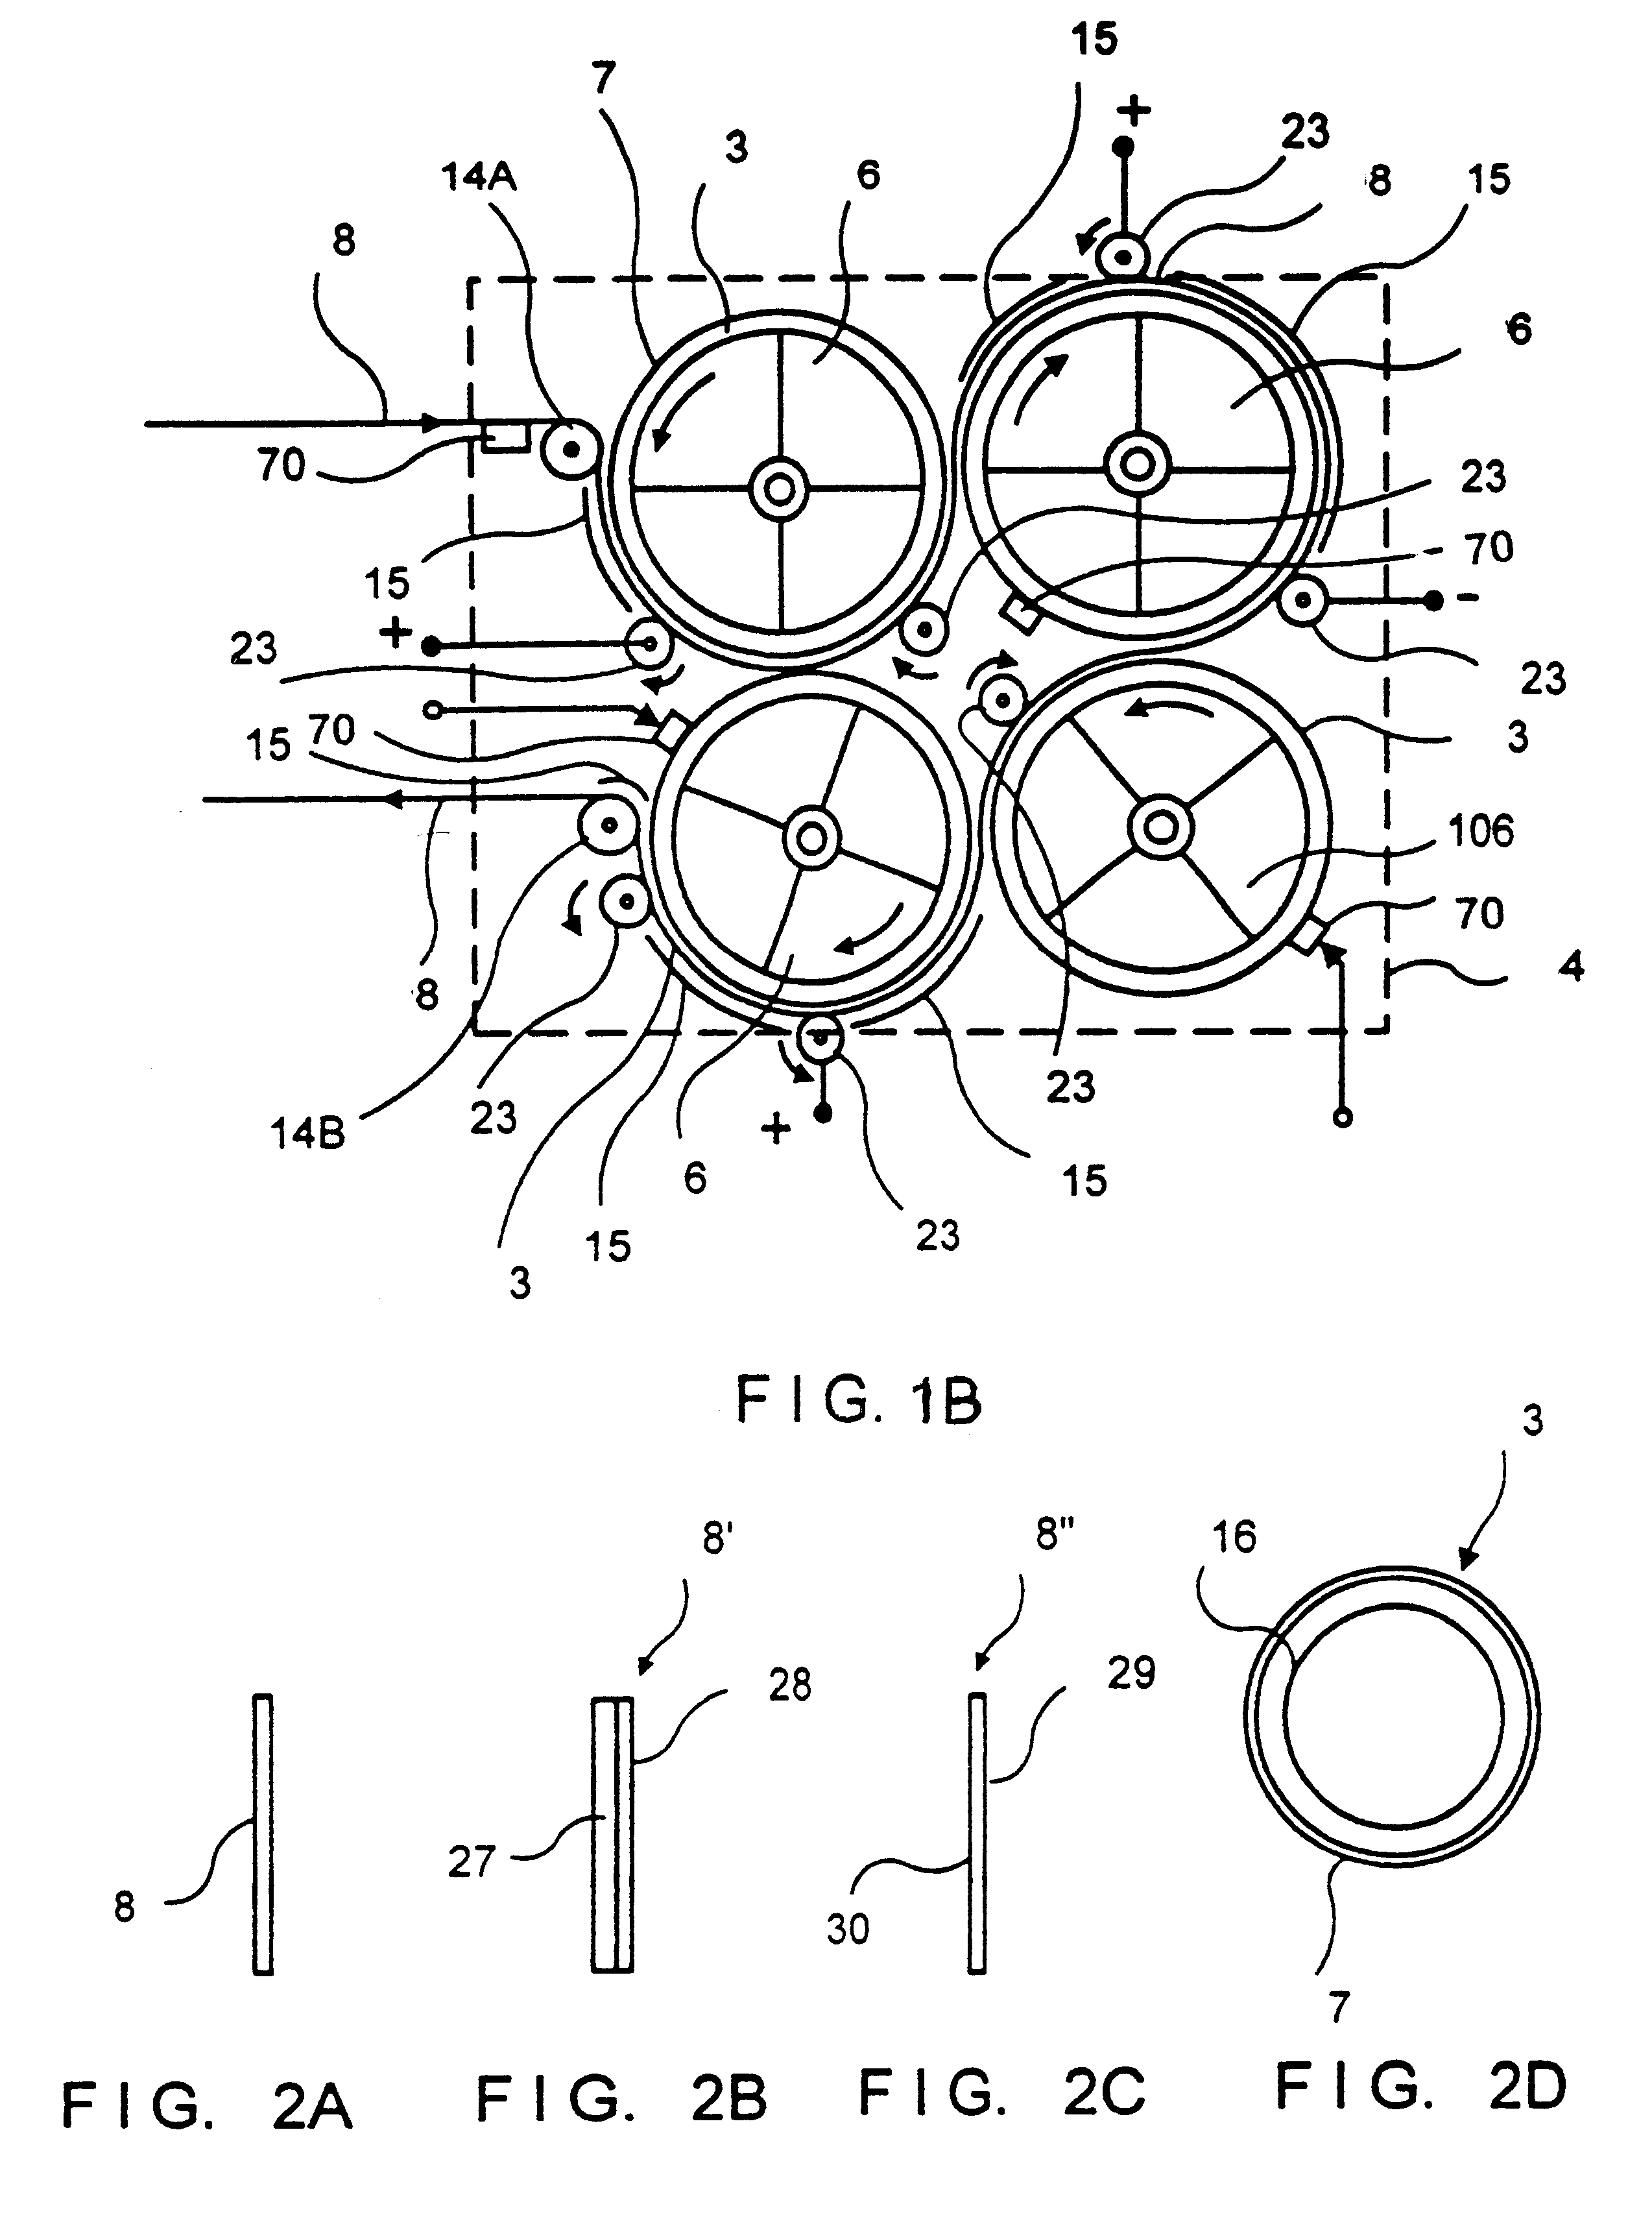 Metal-air fuel cell battery system employing a plurality of moving cathode structures for improved volumetric power density